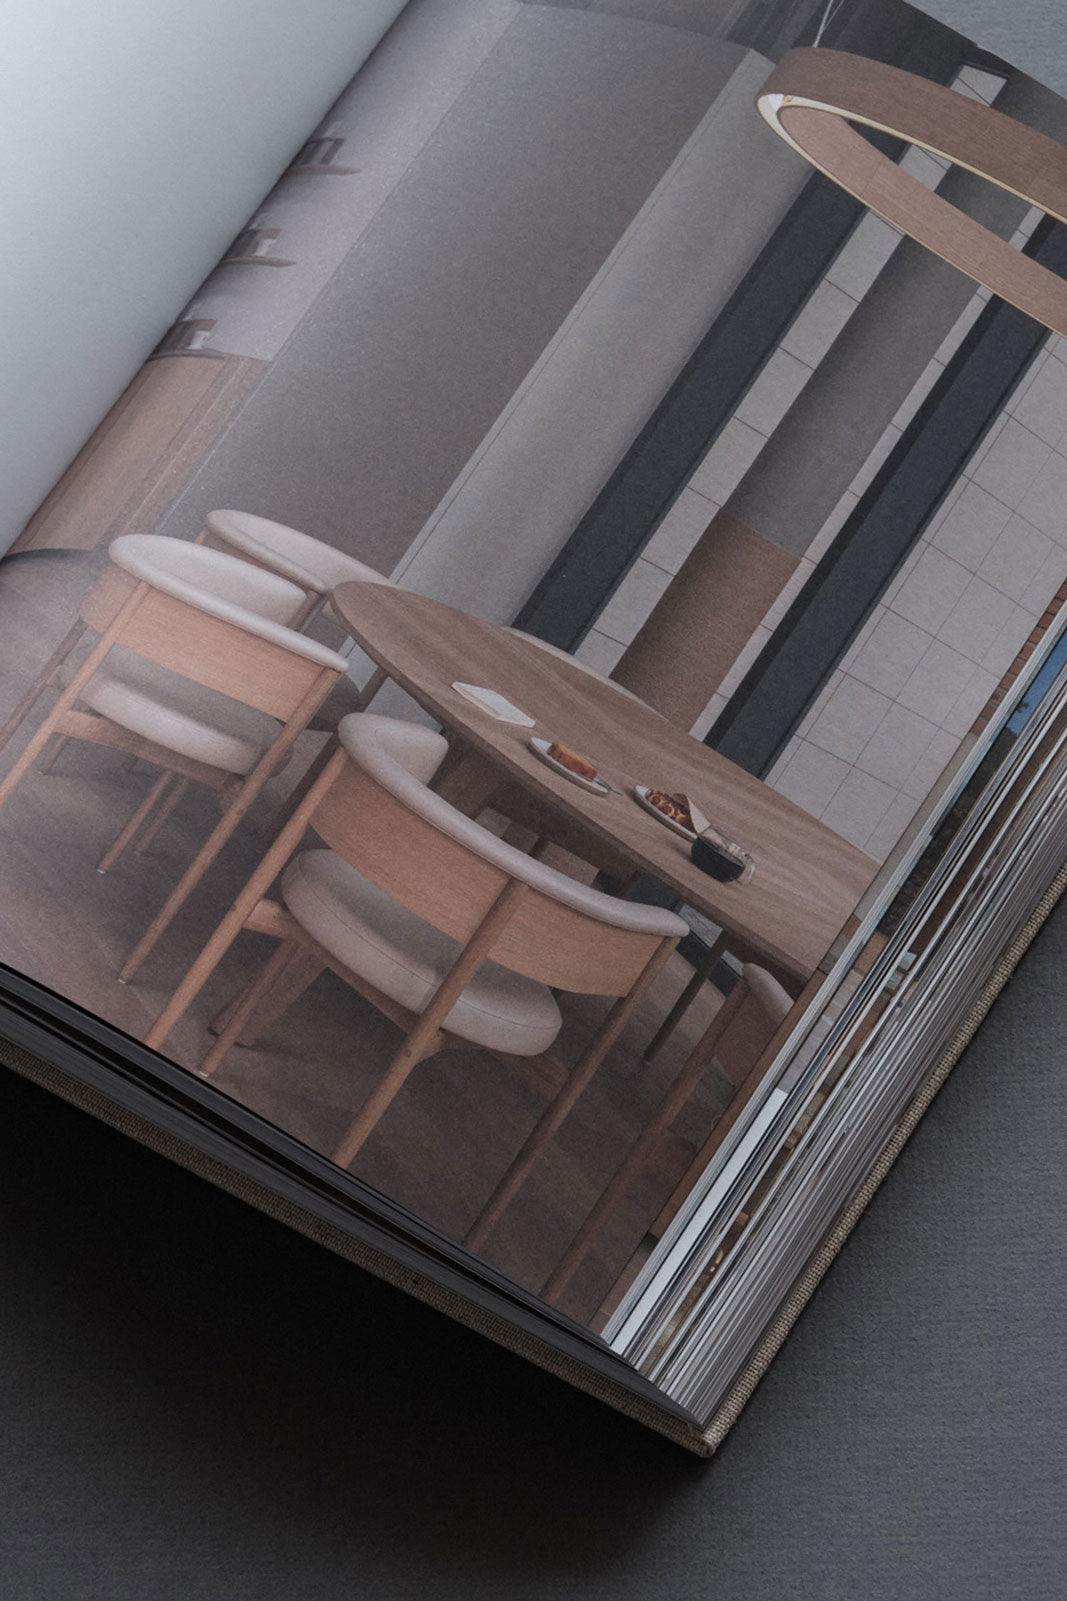 Softer Volumes: Cafes - Coffee Table Book